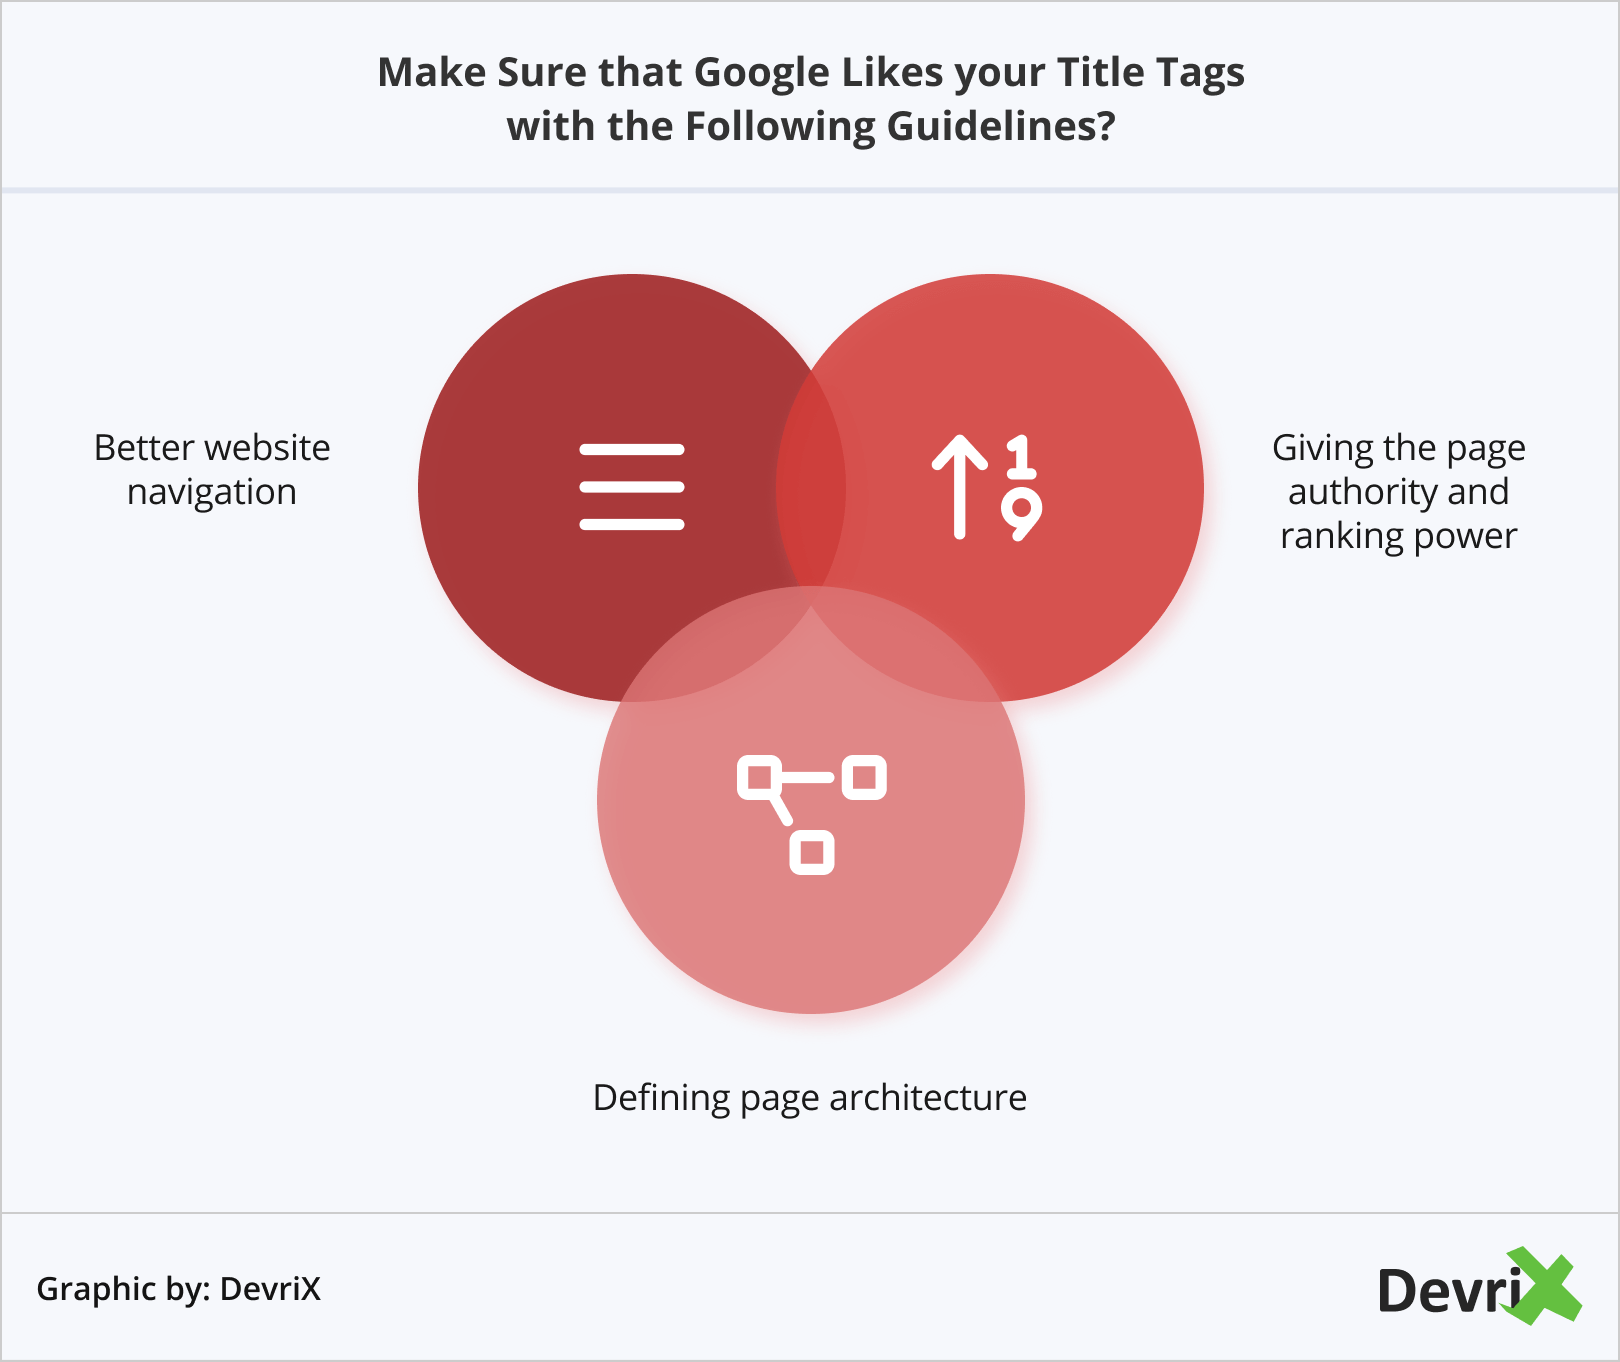 Make Sure that Google Likes your Title Tags with the Following Guidelines